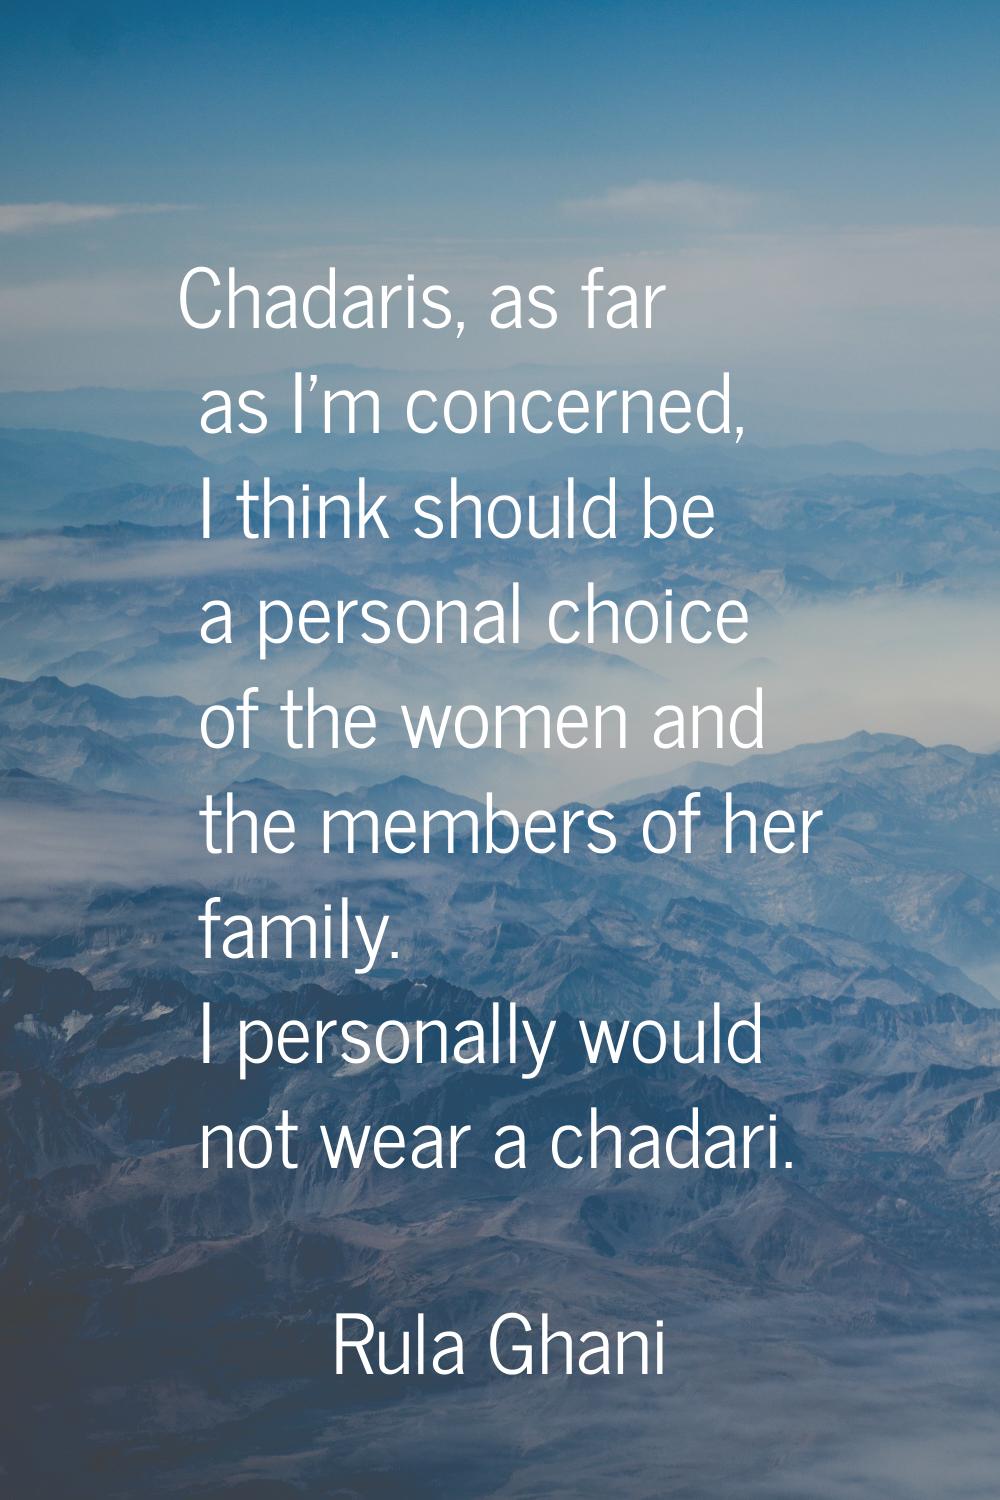 Chadaris, as far as I'm concerned, I think should be a personal choice of the women and the members